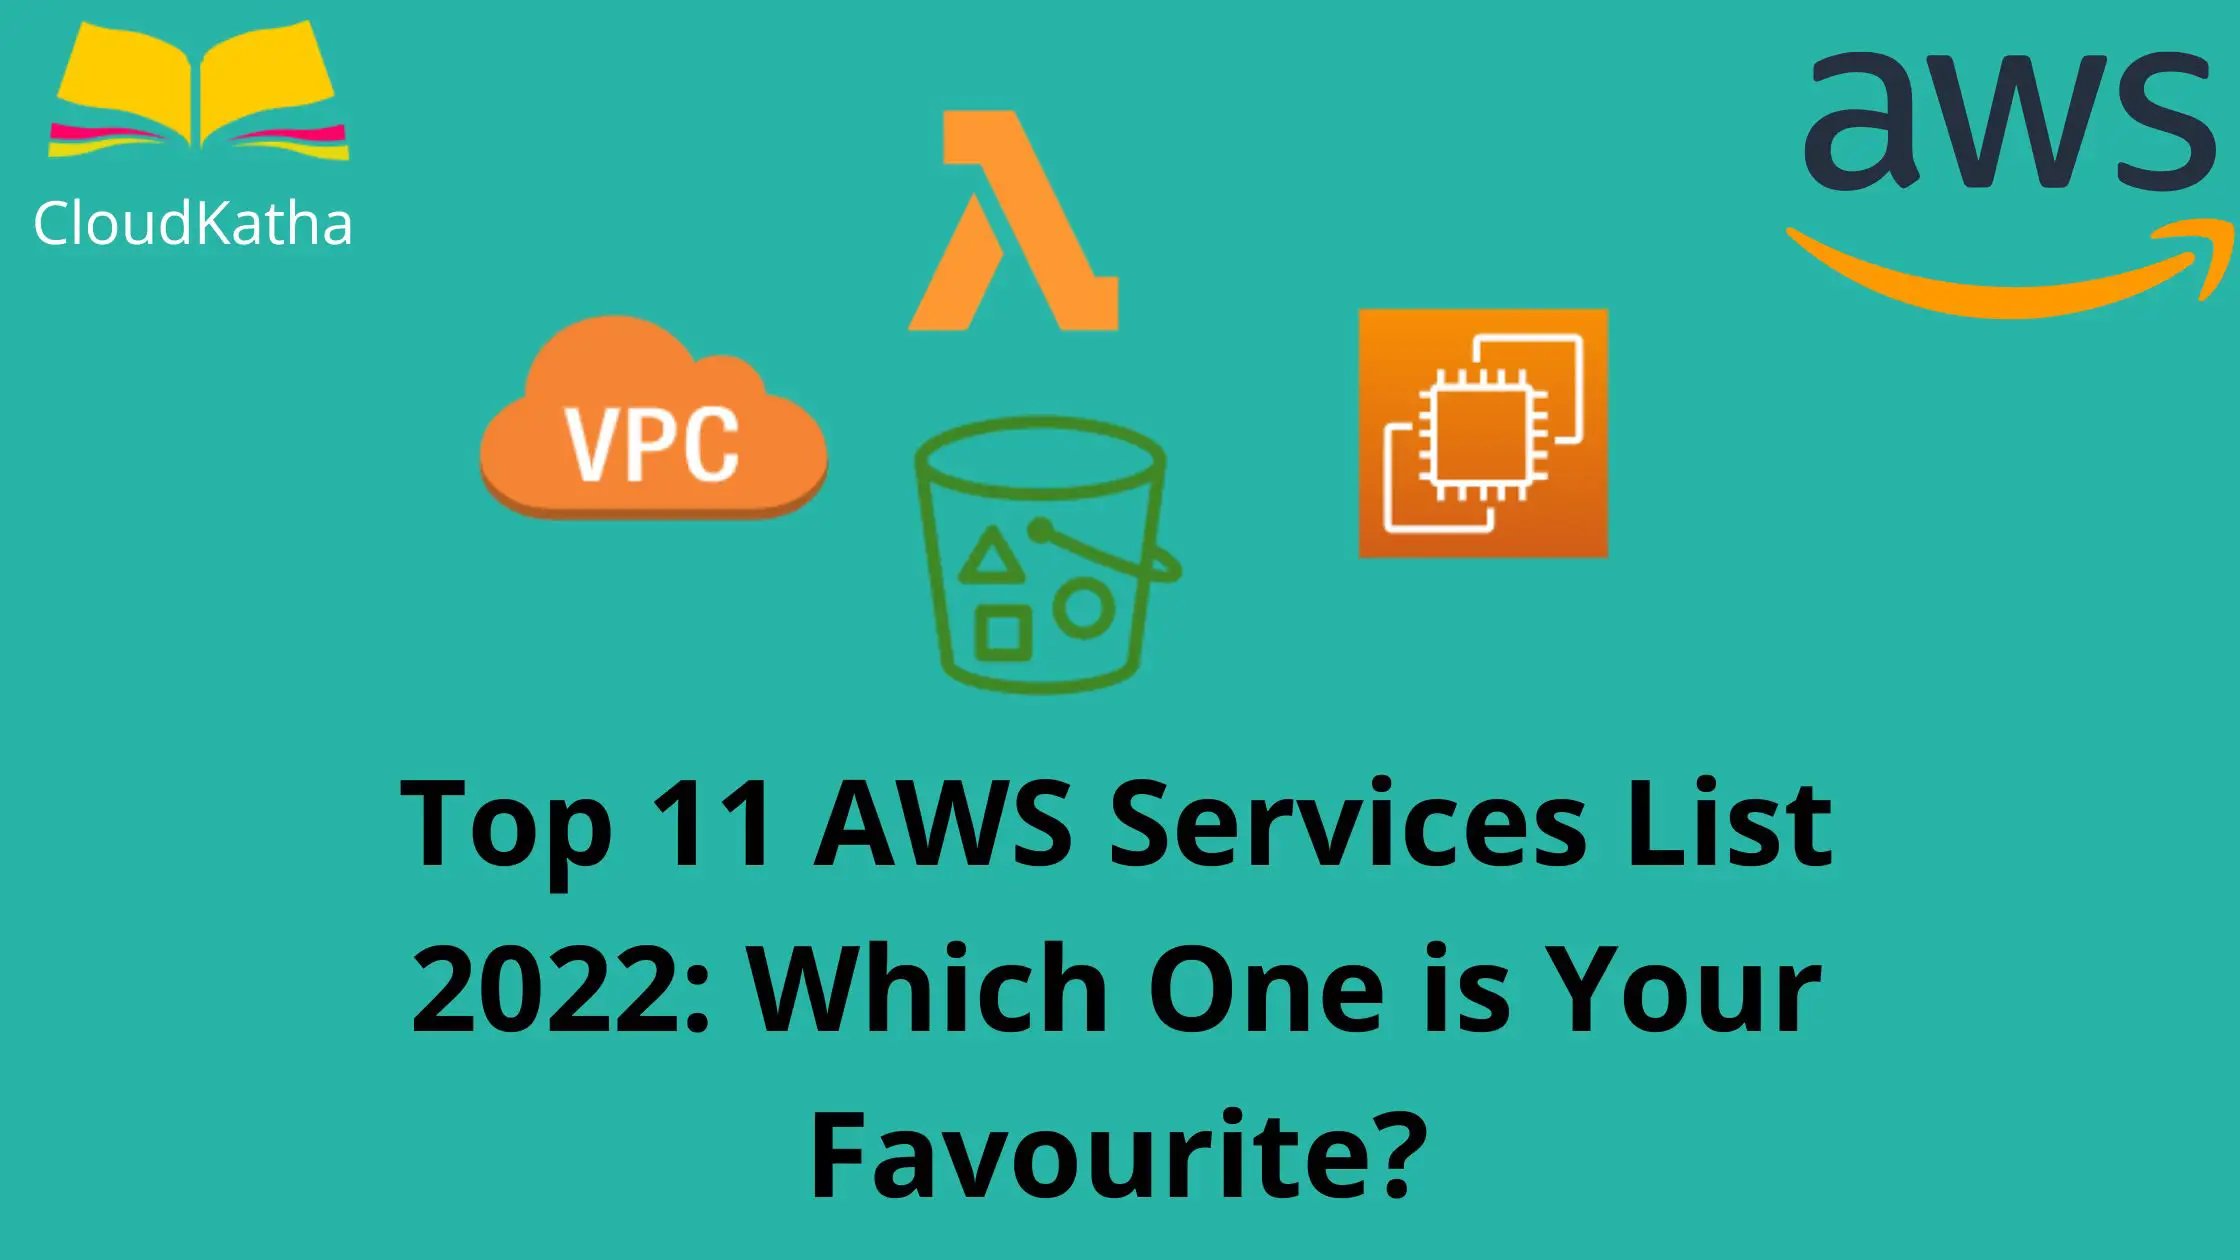 Top 11 AWS Services List 2022 Which One is Your Favourite